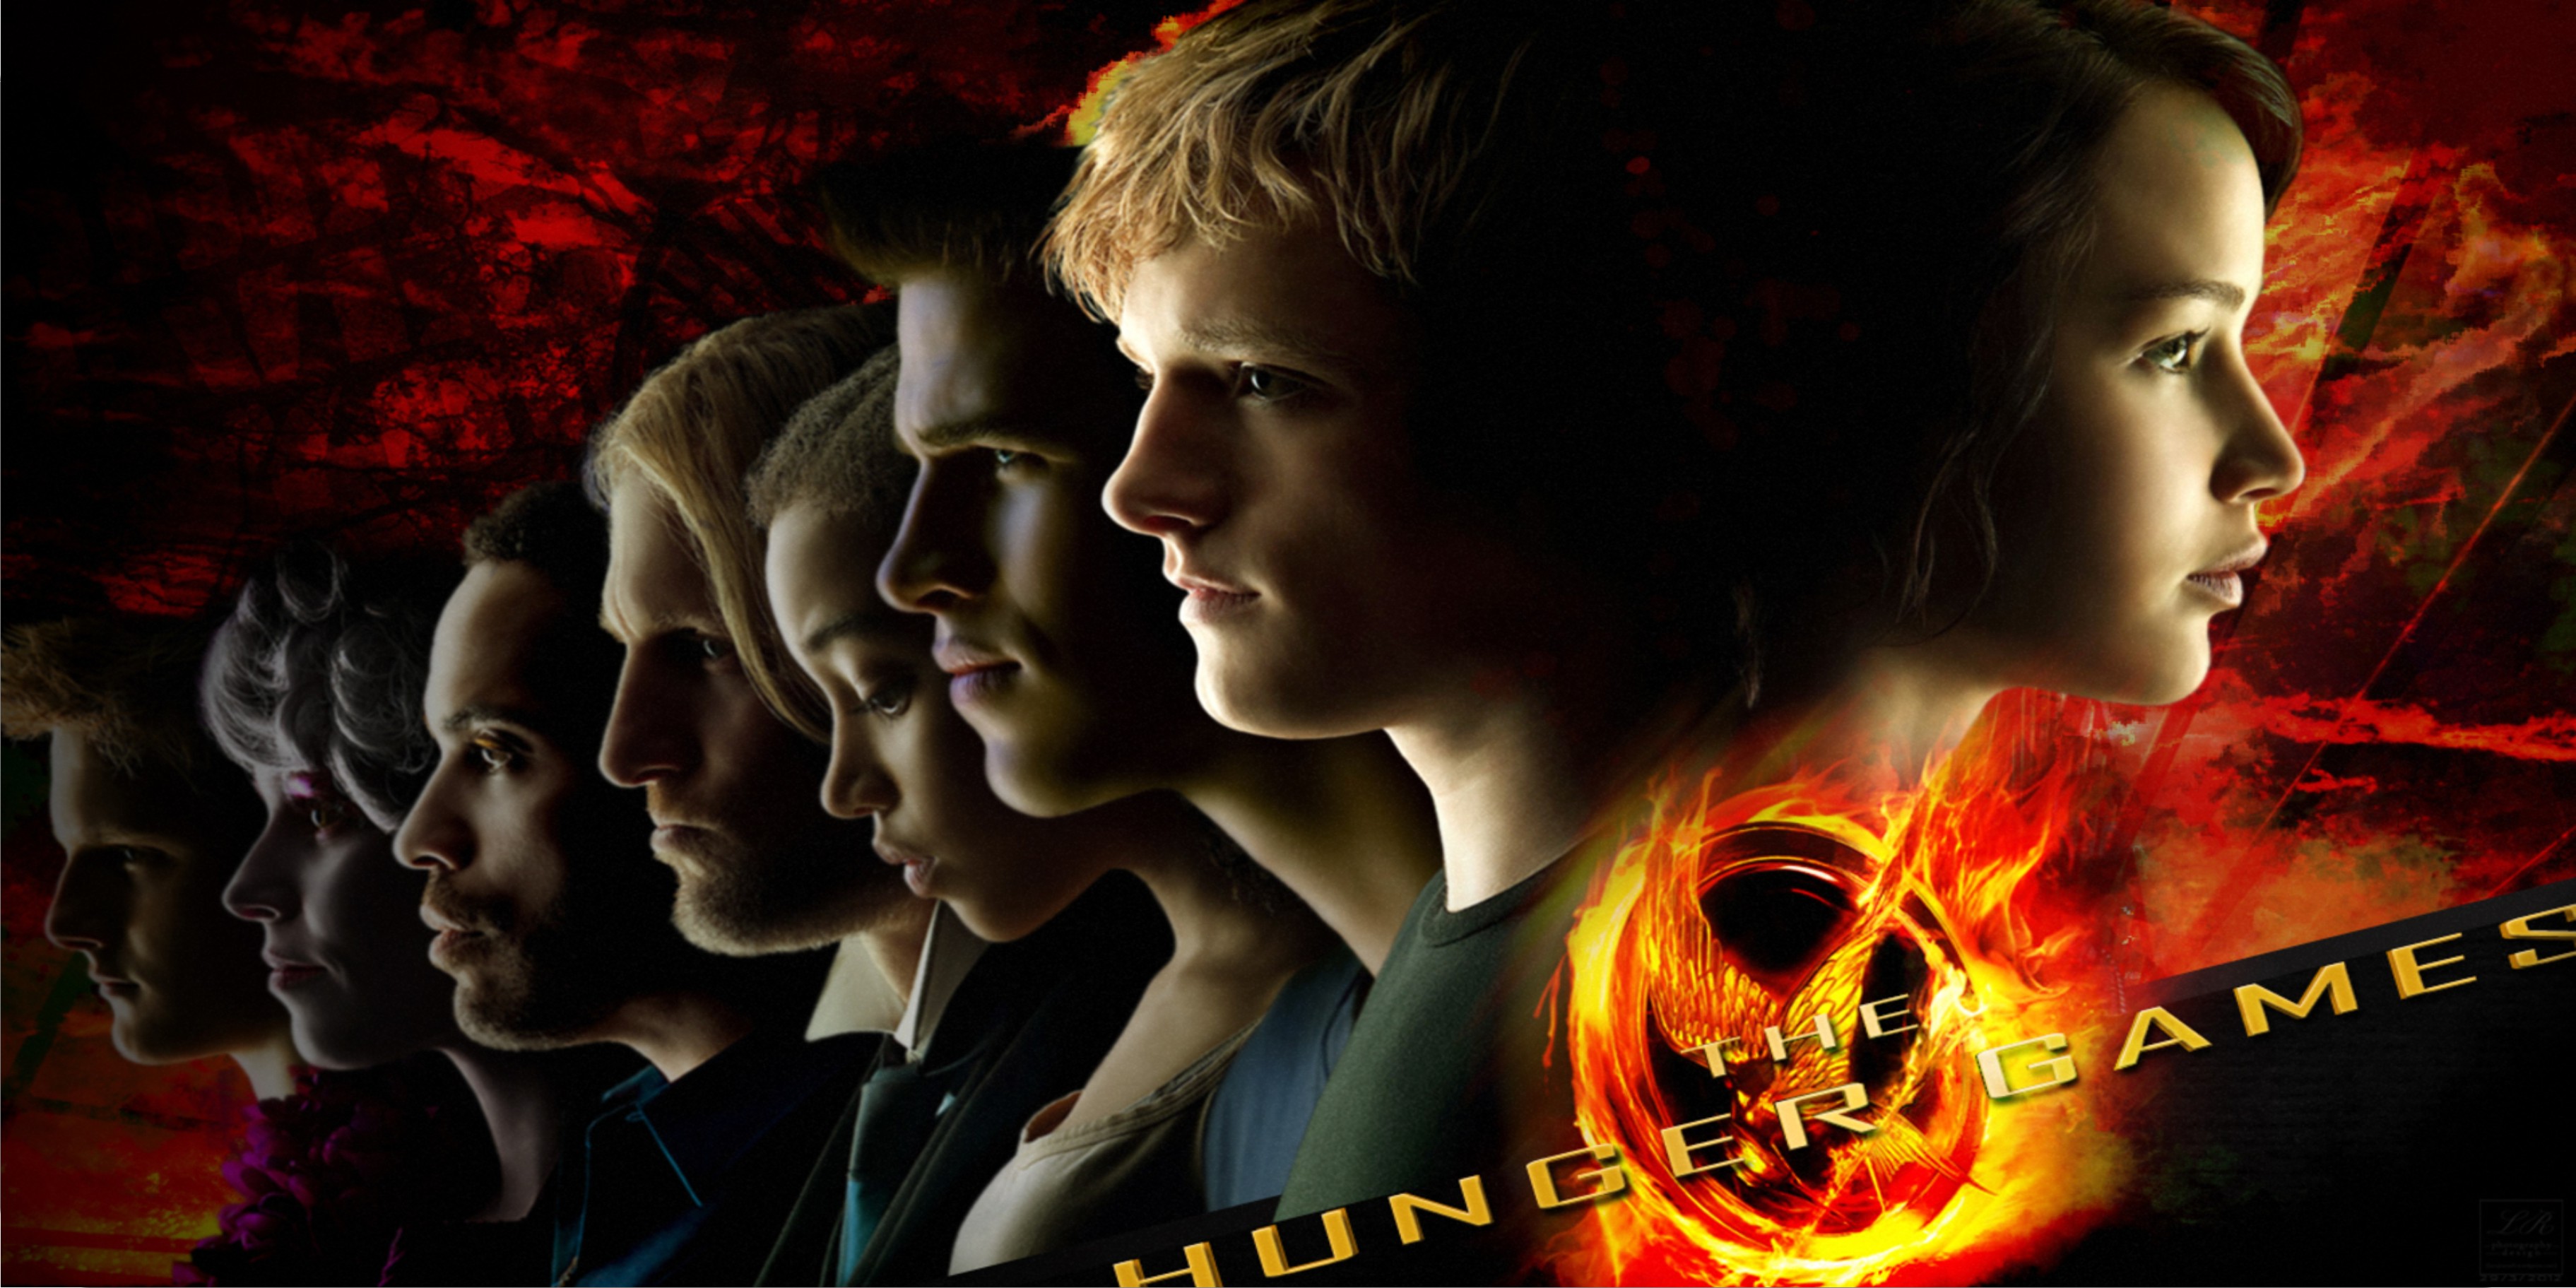 The Hunger GAMEs Profile Photo License Plate